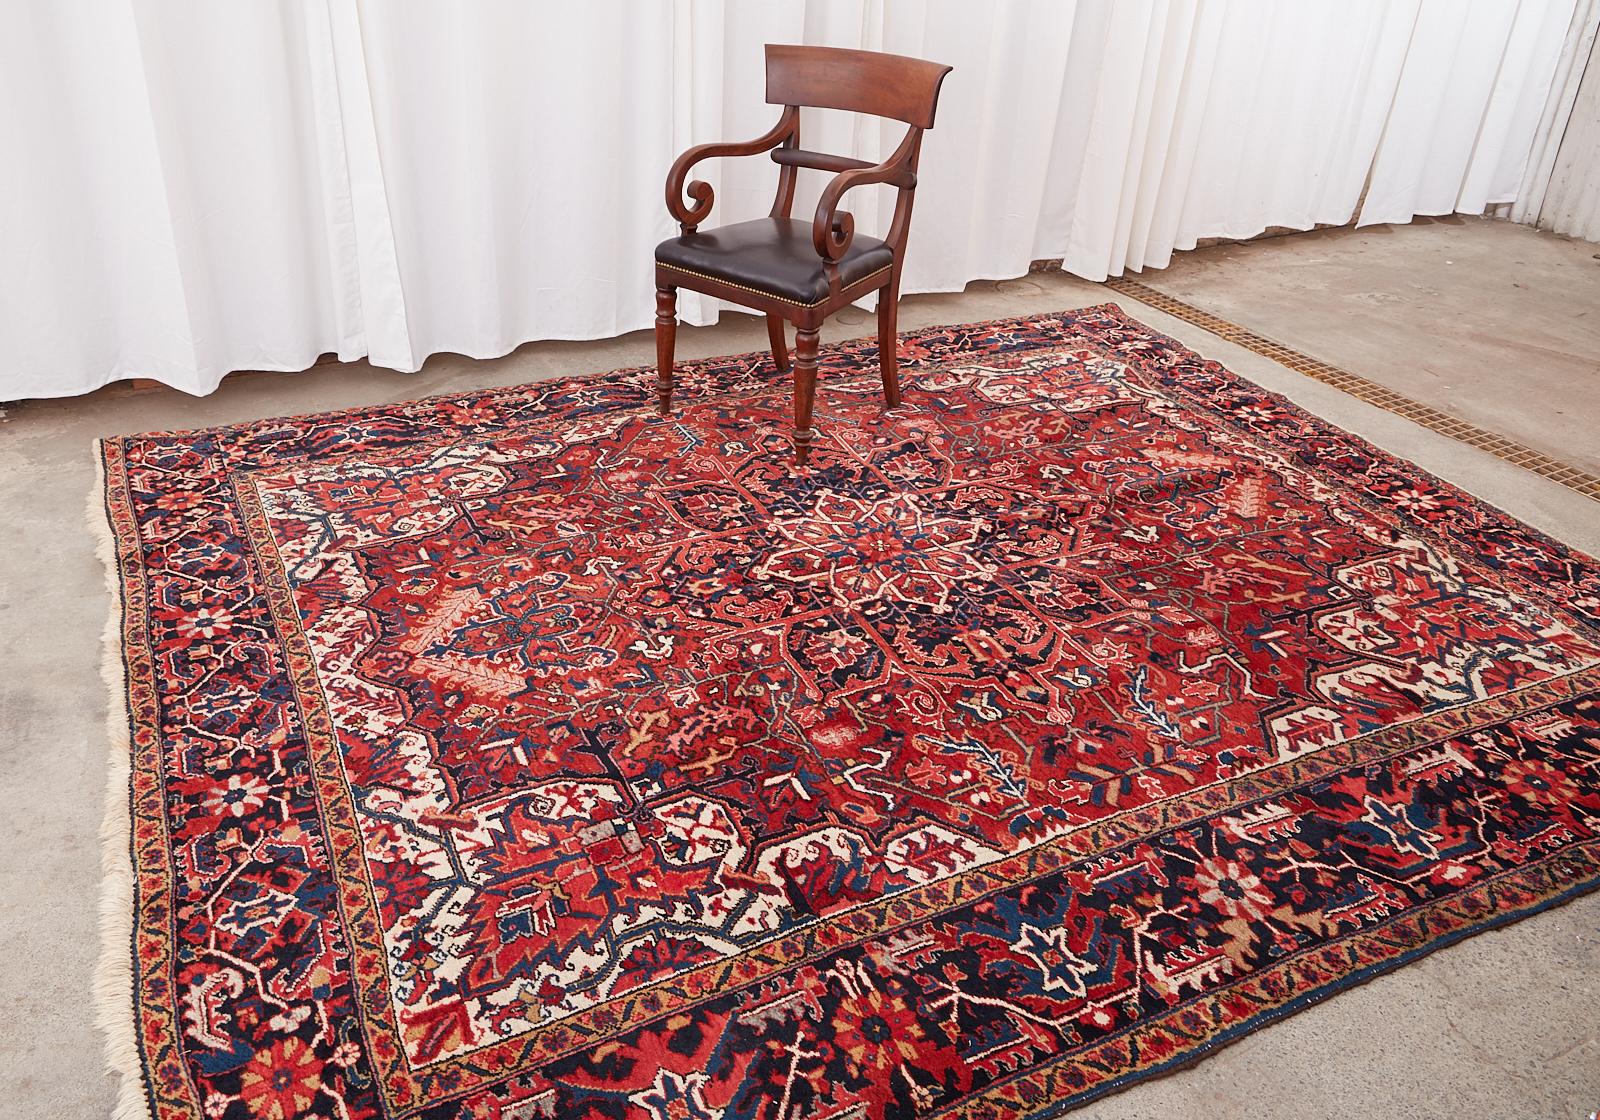 Distinctive antique Persian Heriz rug featuring a star-shaped medallion and large white corner spandrels. Bold Heriz colors of all-natural dyes having angular geometric designs in intricate patterns. Classicly styled Heriz made for Avakian Bros.